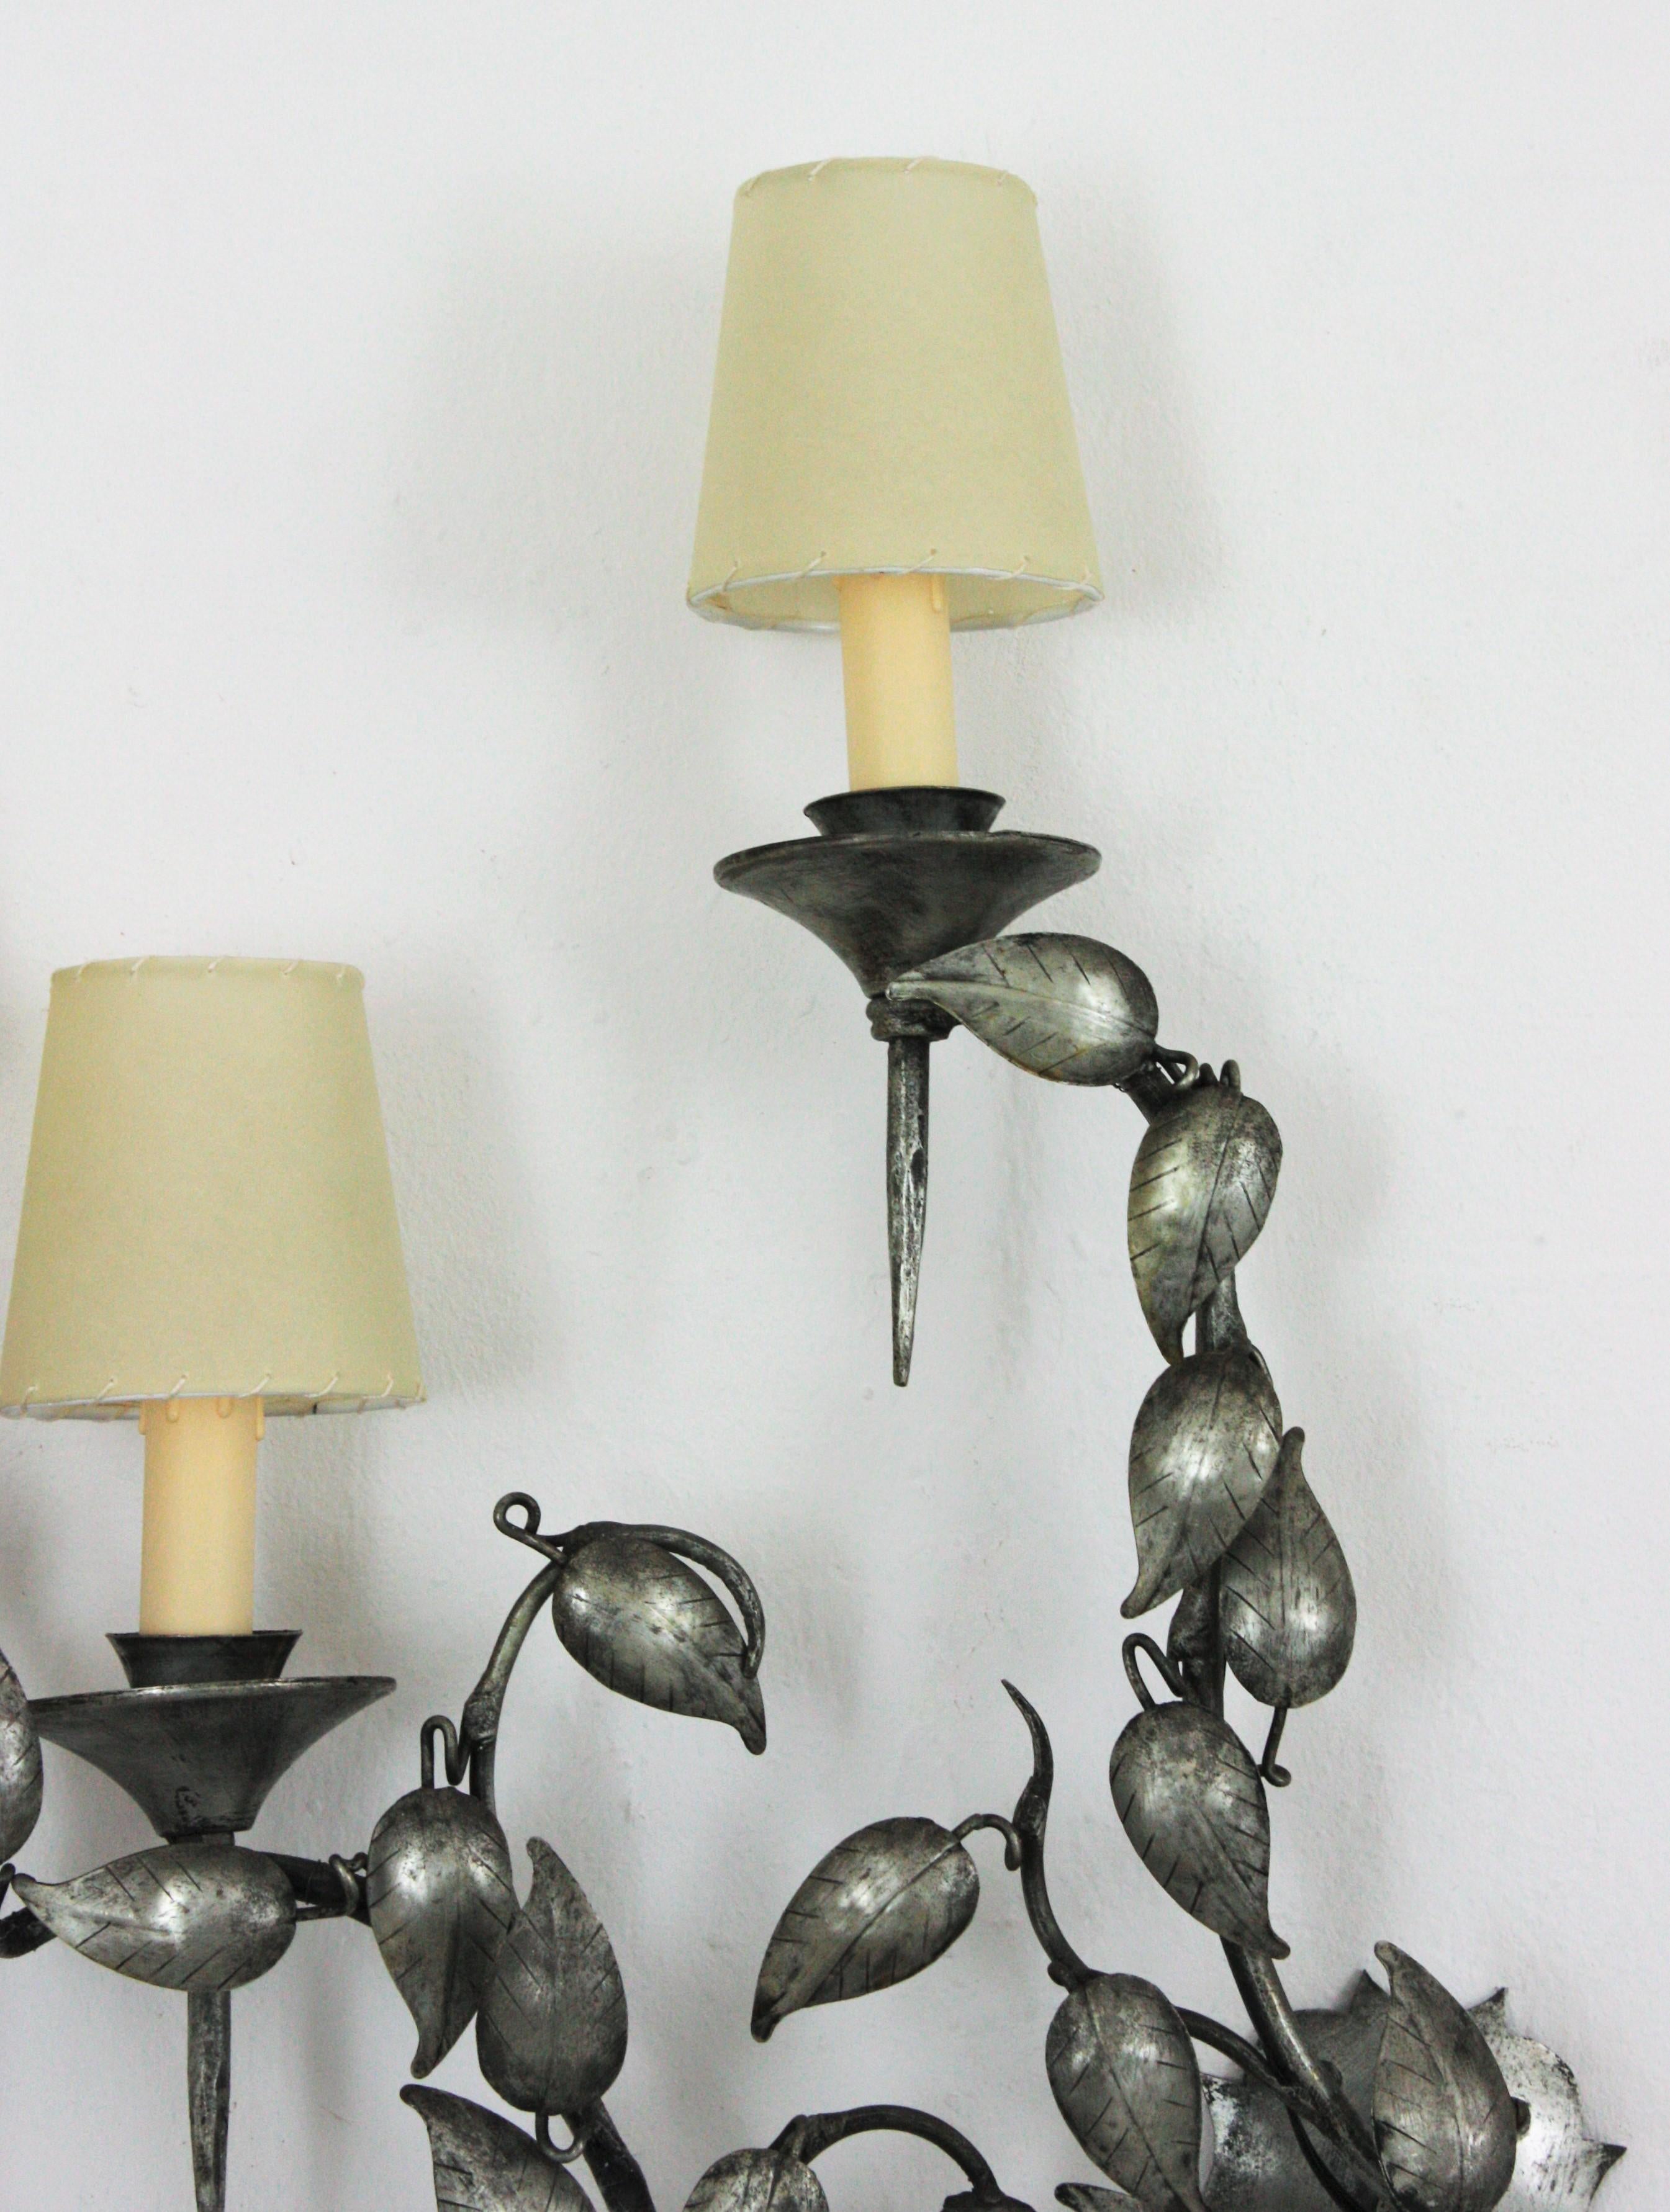 Foliage Wall Sconce with Three Torch Lights in Silver Patinated Iron, 1950s For Sale 2